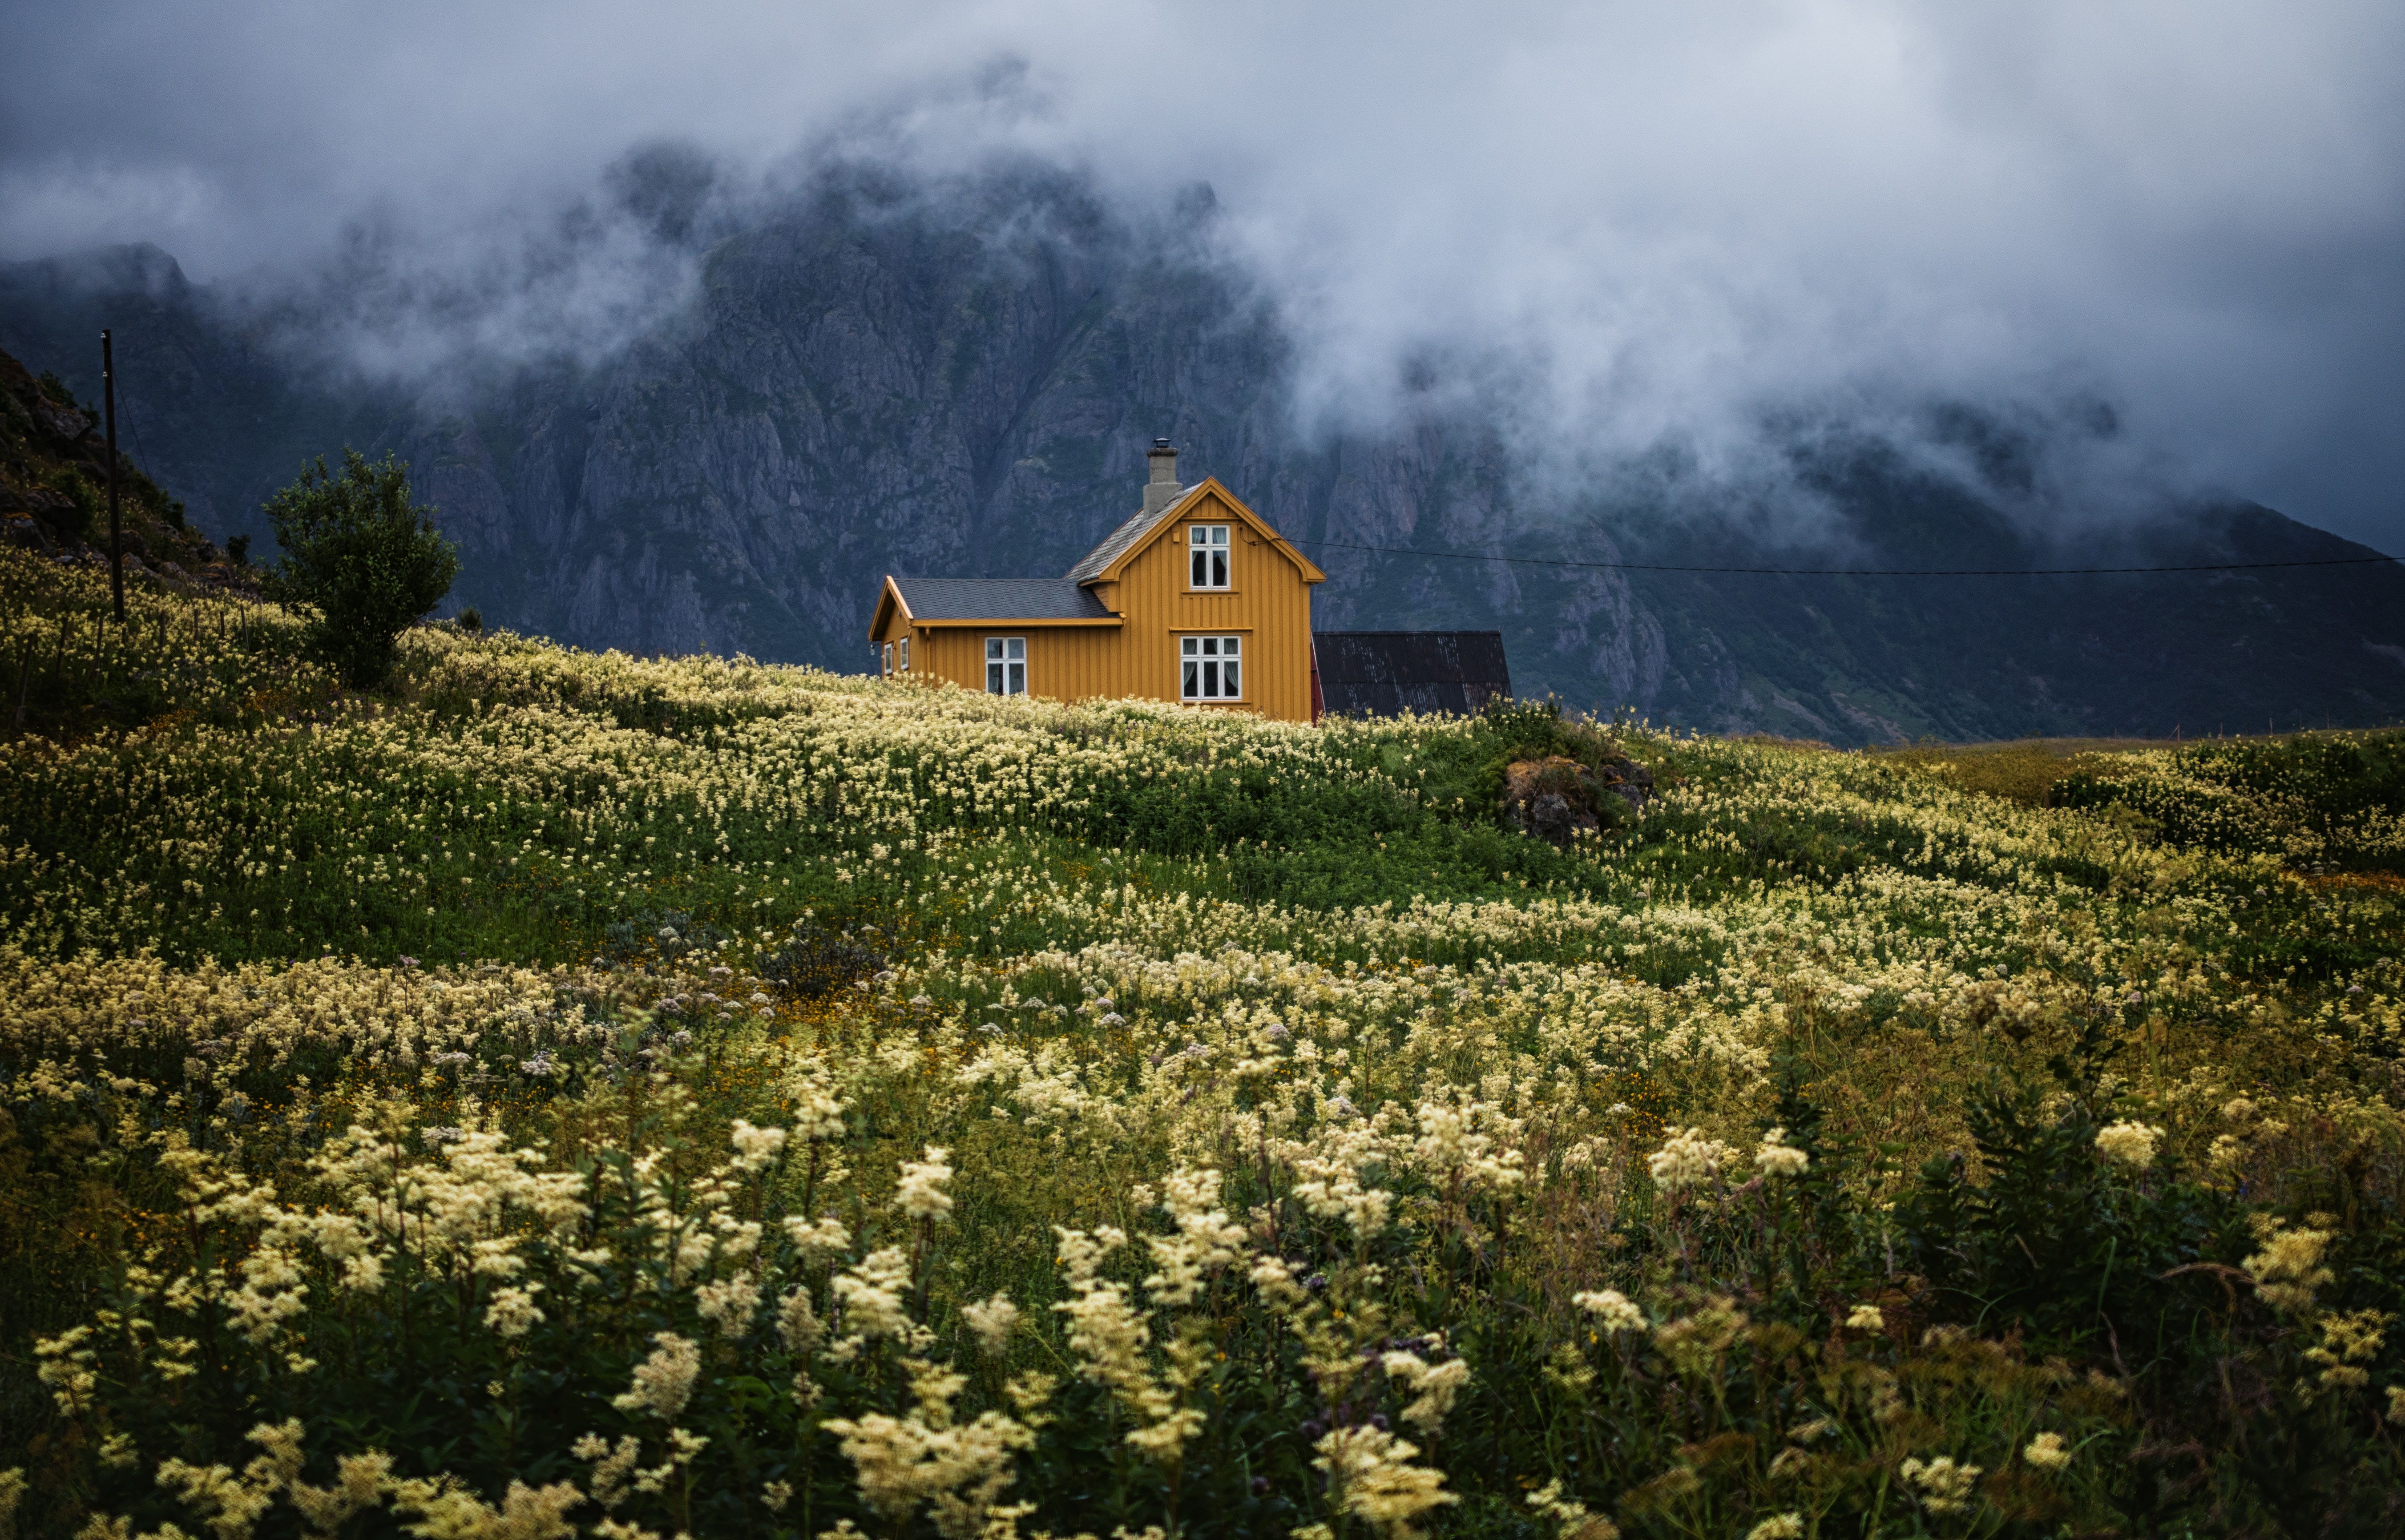 A yellow house in the middle of a field of flowers with a mountain in the background. - Farm